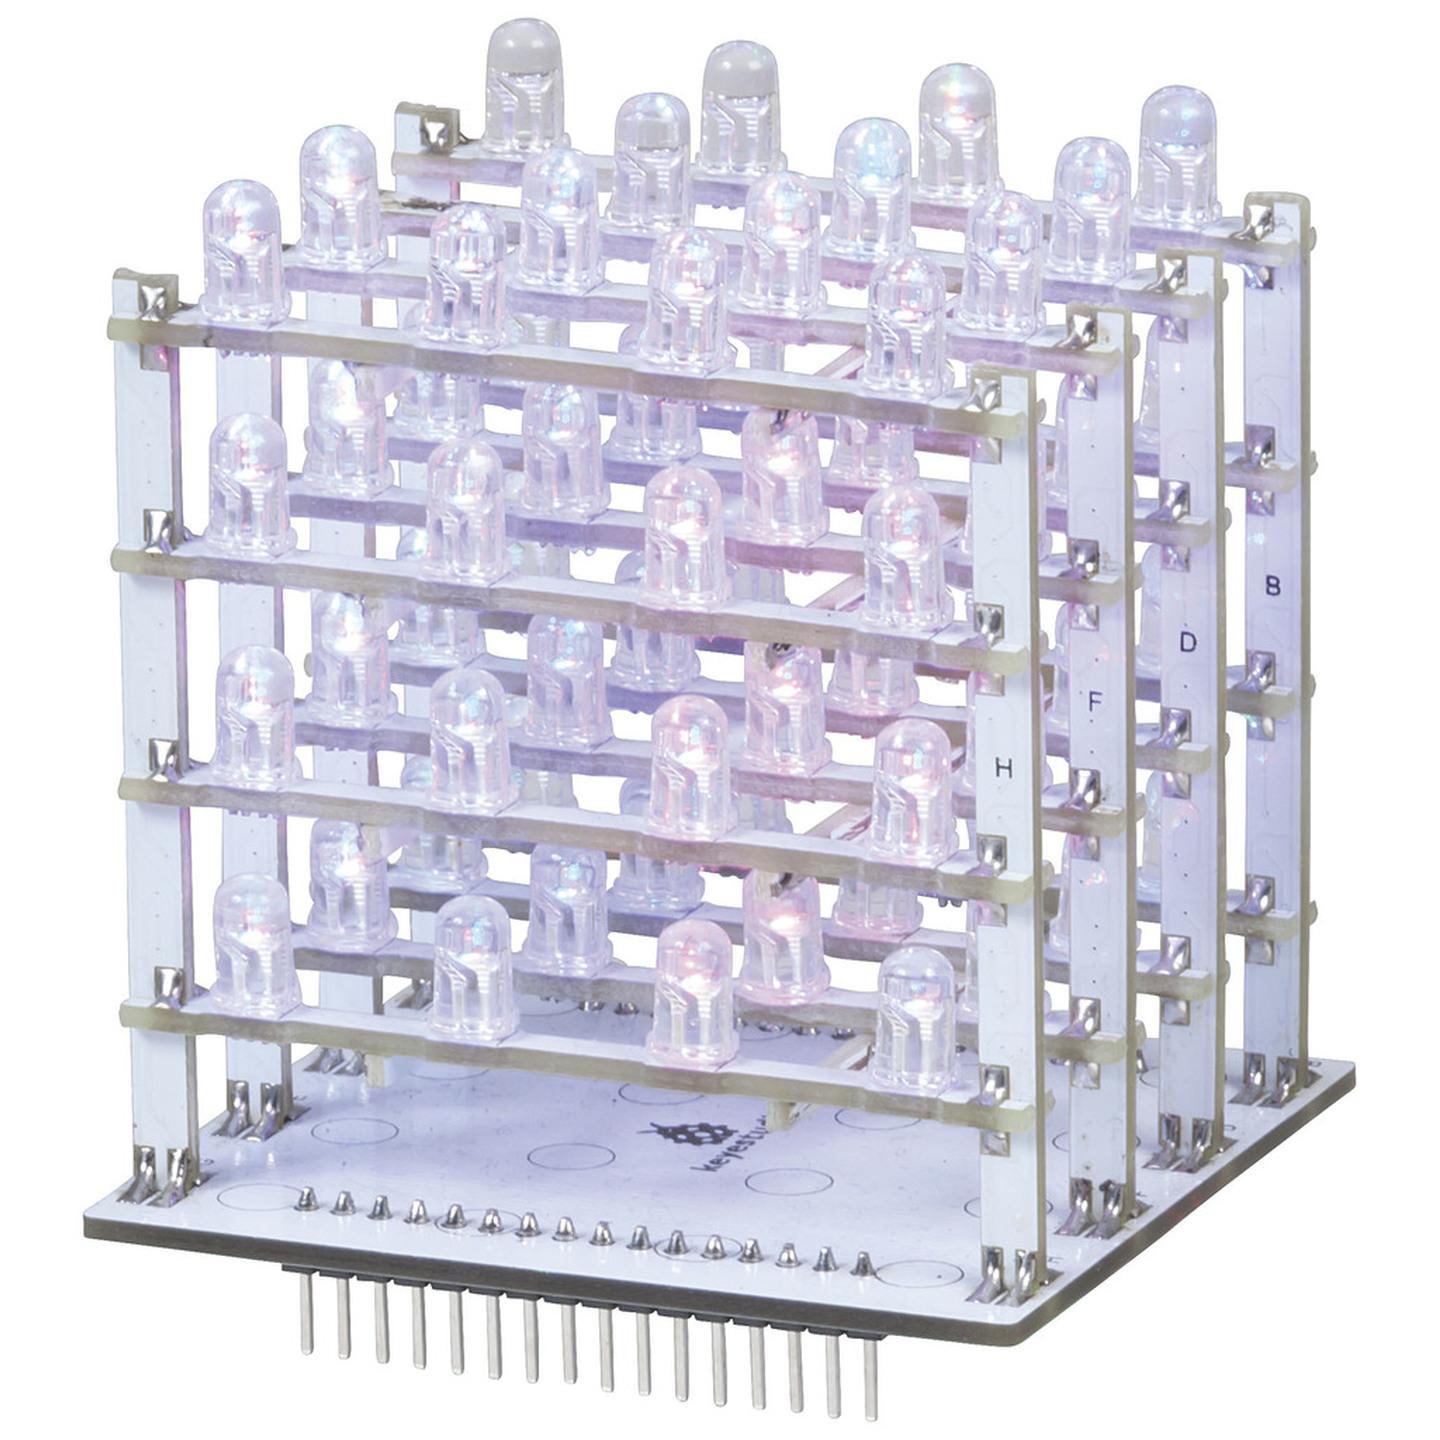 RGB LED Cube Kit without Driver